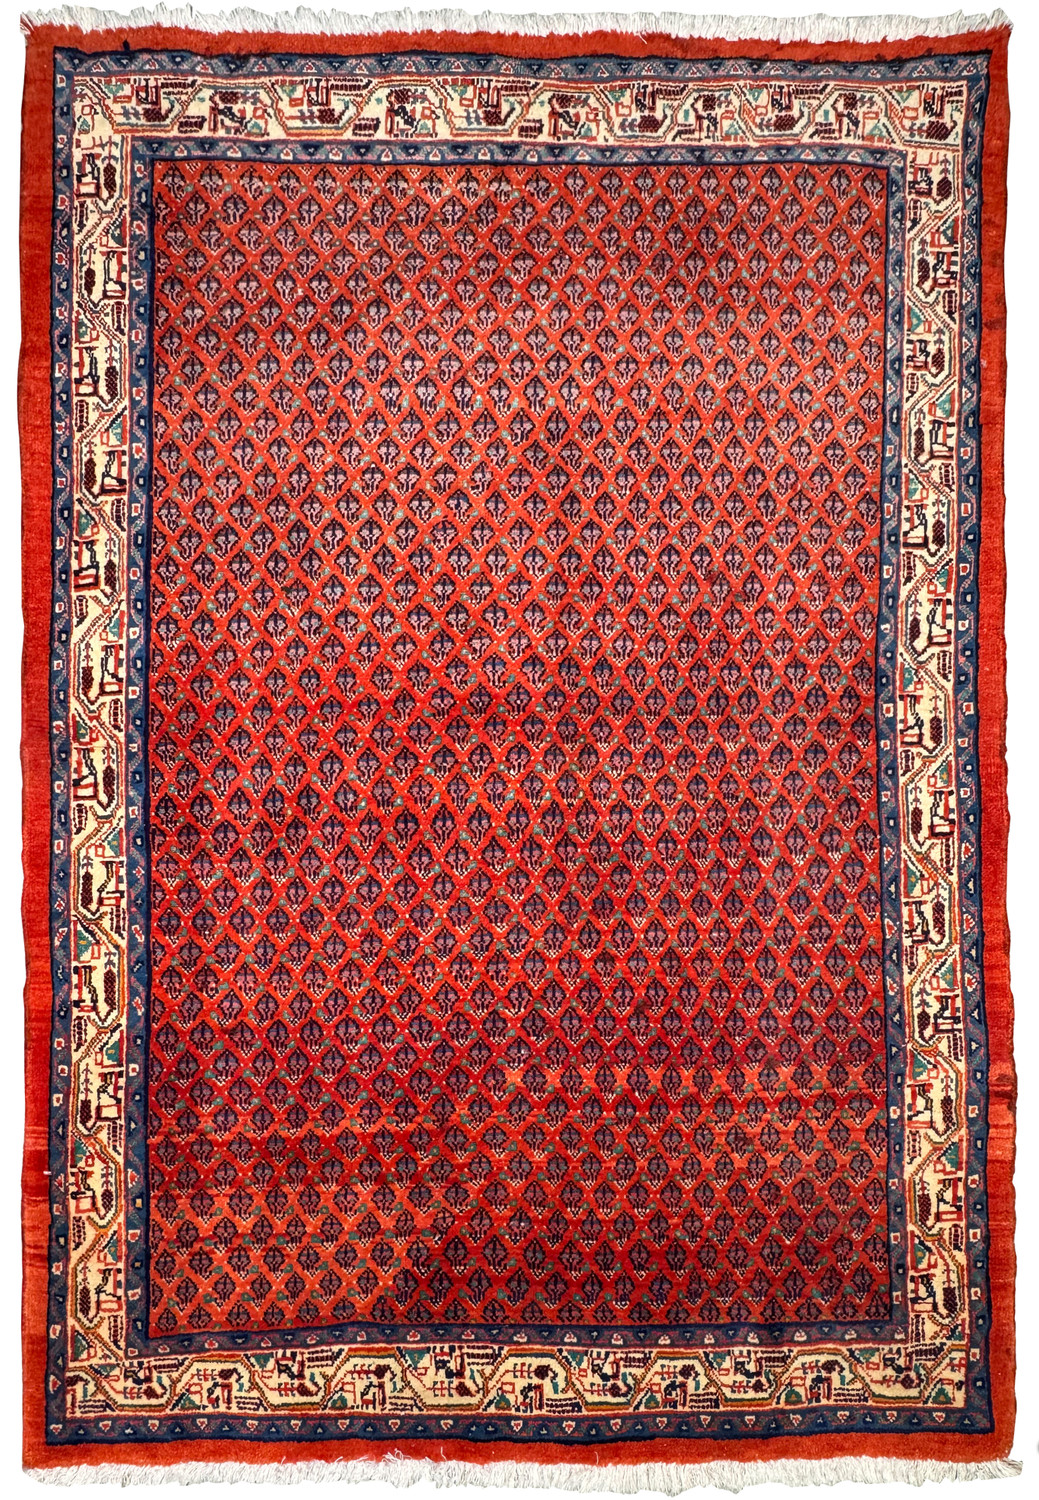 Overhead view of a 3'8 x 5'2 Sarough Mir Rug with a dense all-over pattern in vibrant red and navy blue, framed by a detailed border